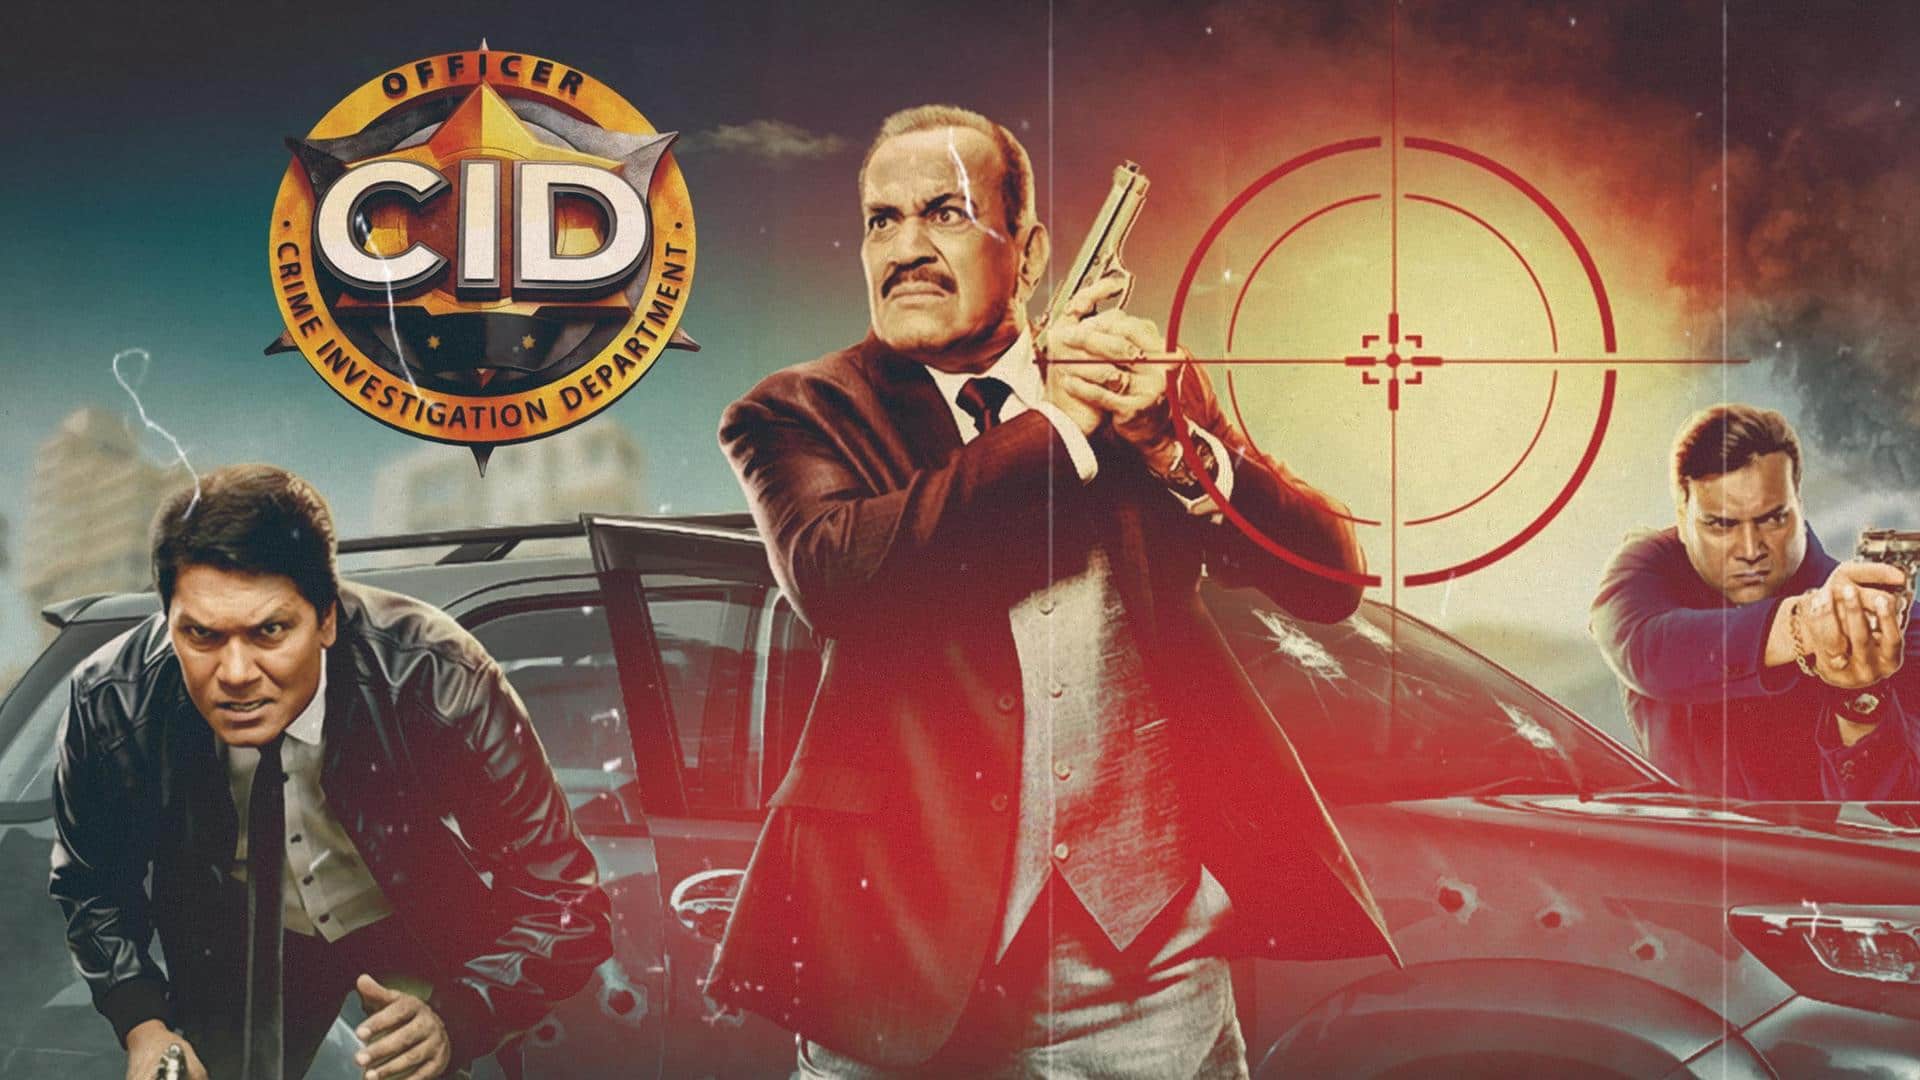 25 years of 'CID': Decoding what made it a phenomenon